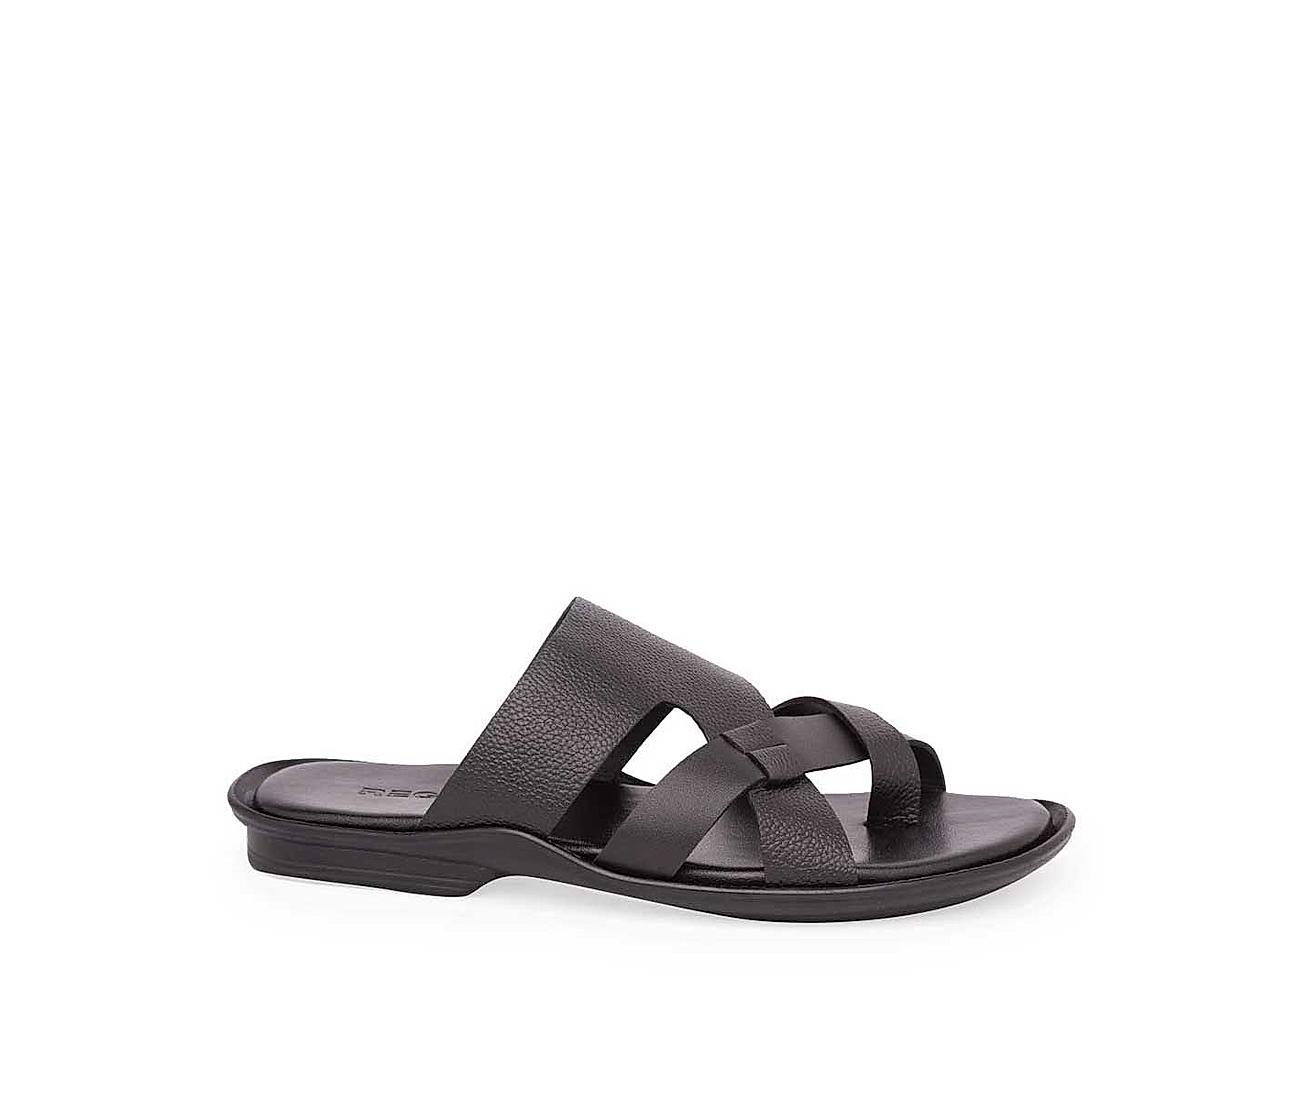 Hush Puppies Sandals India Price - Hush Puppies Lilly Criss Cross Leather -  Black Womens Sandals